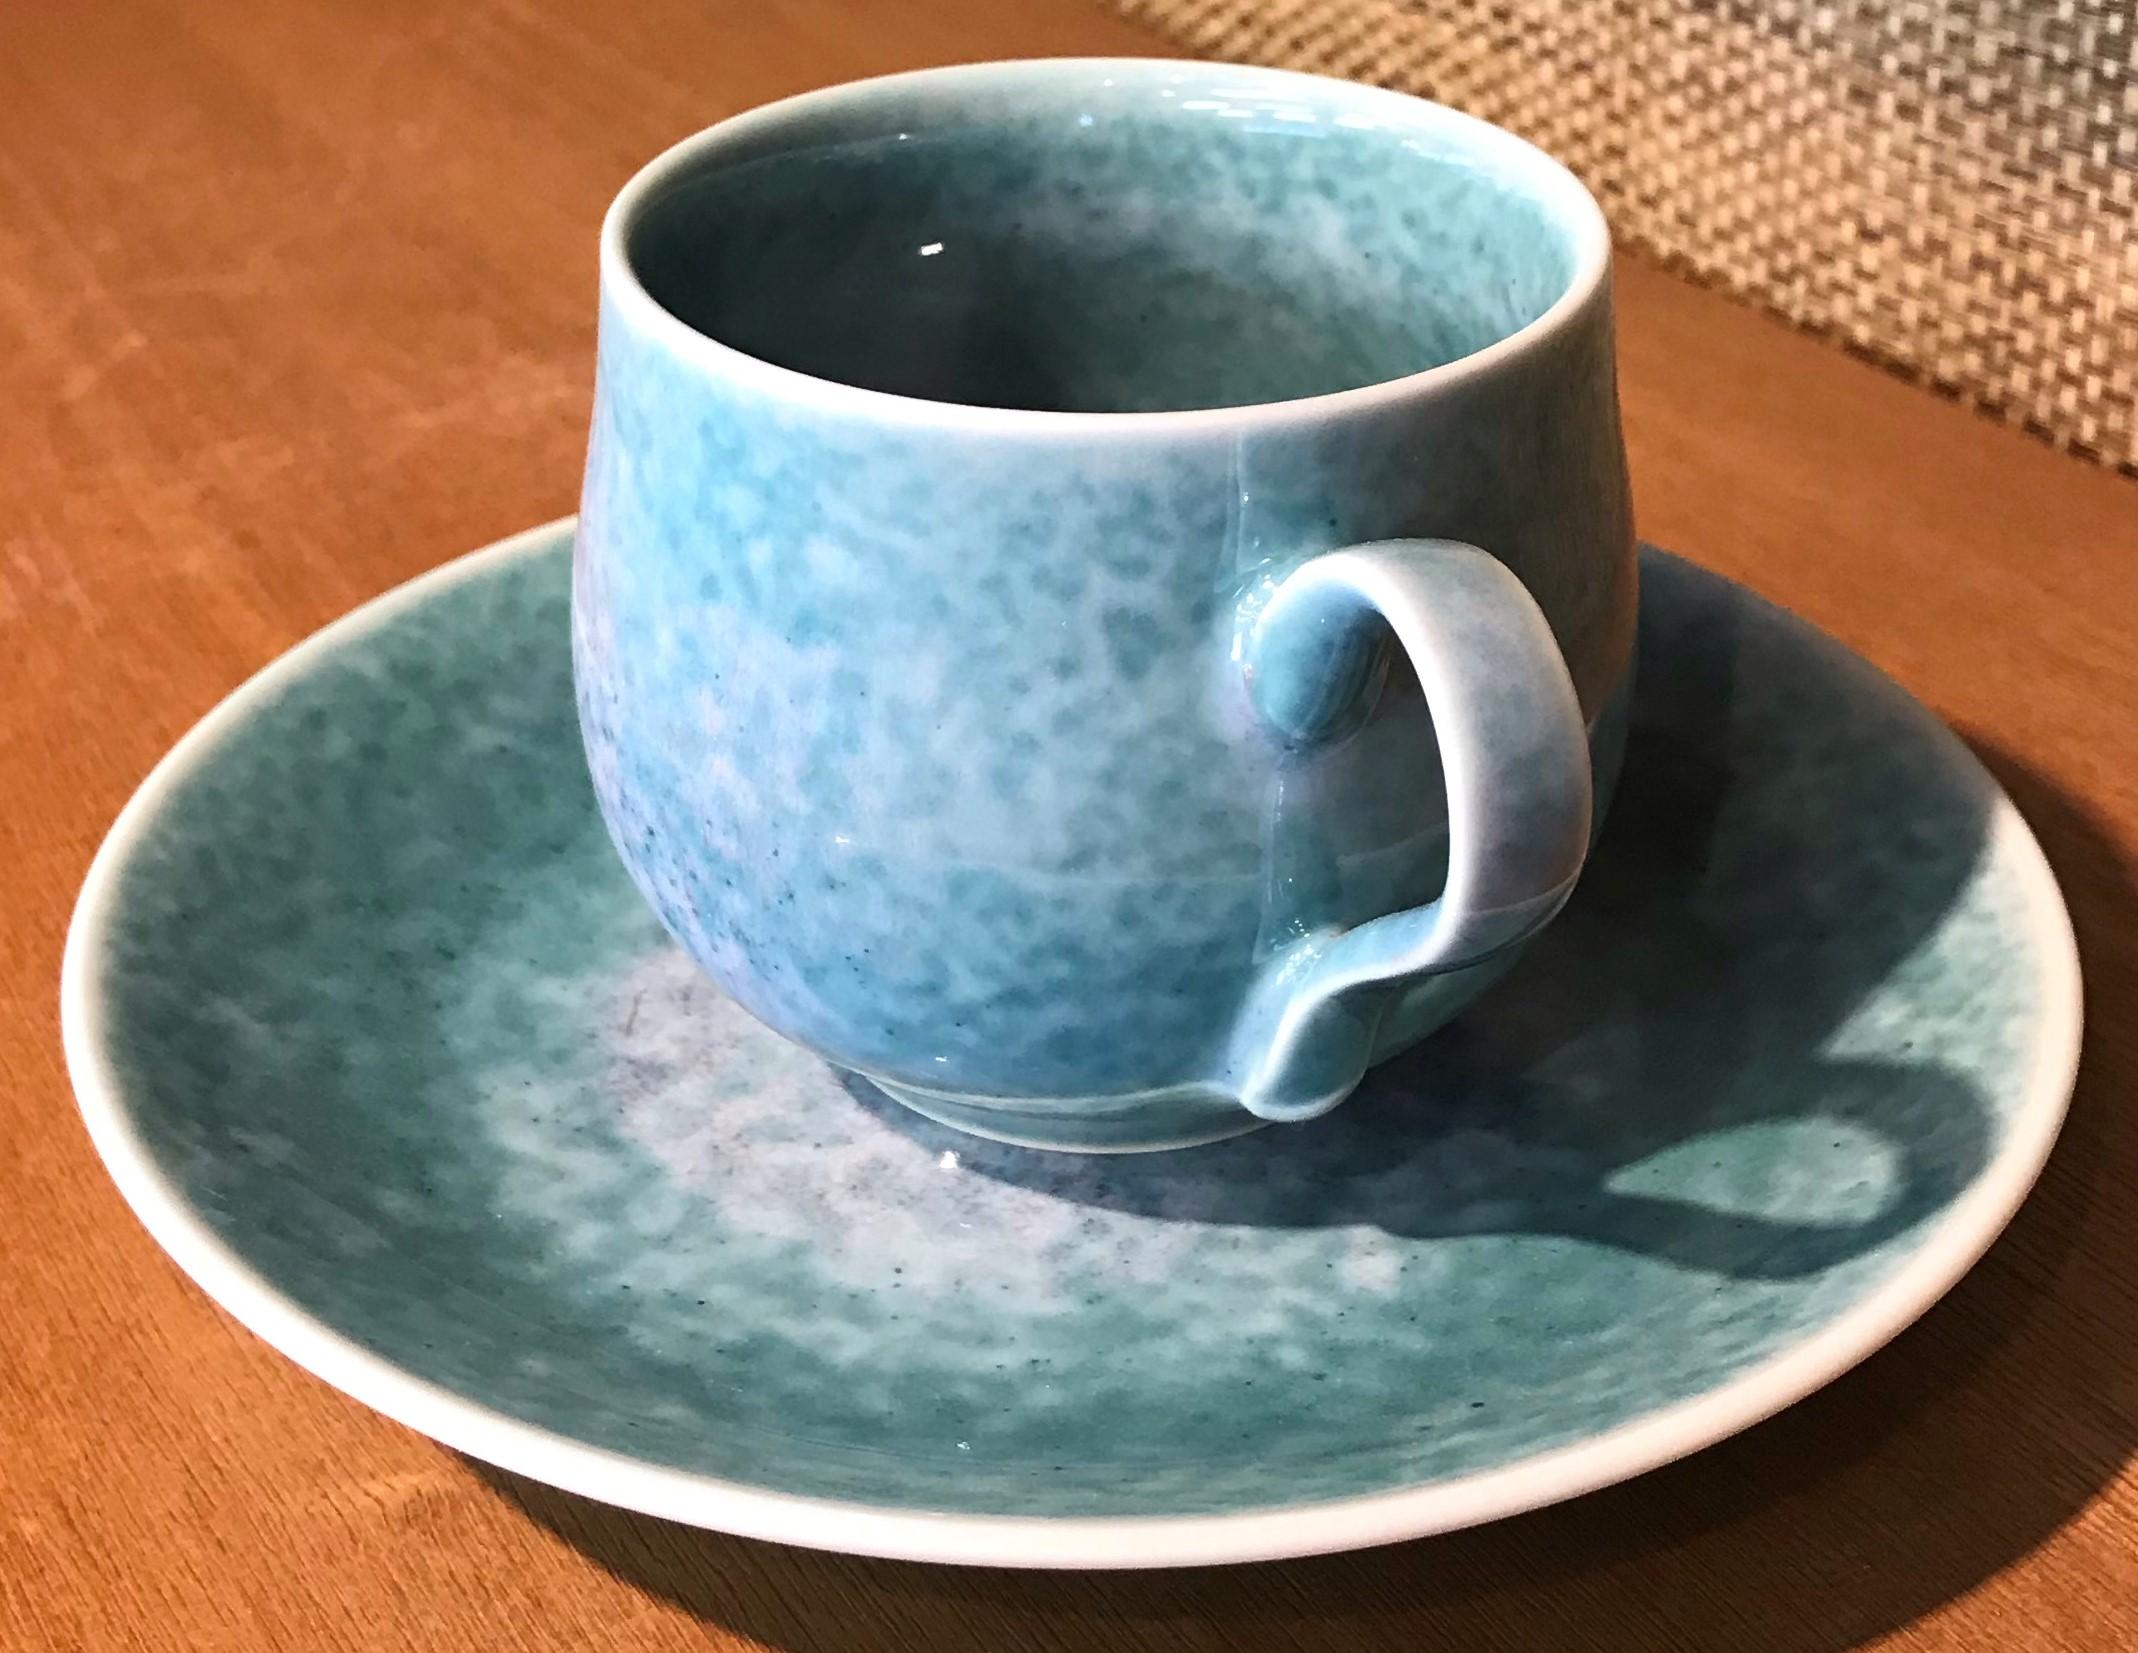 Exquisite contemporary Japanese porcelain cup and saucer, hand-glazed in stunning signature turquoise with a hint of pink accent, a signed work by highly acclaimed award-winning master porcelain artist from the Imari-Arita region of Japan. 

In